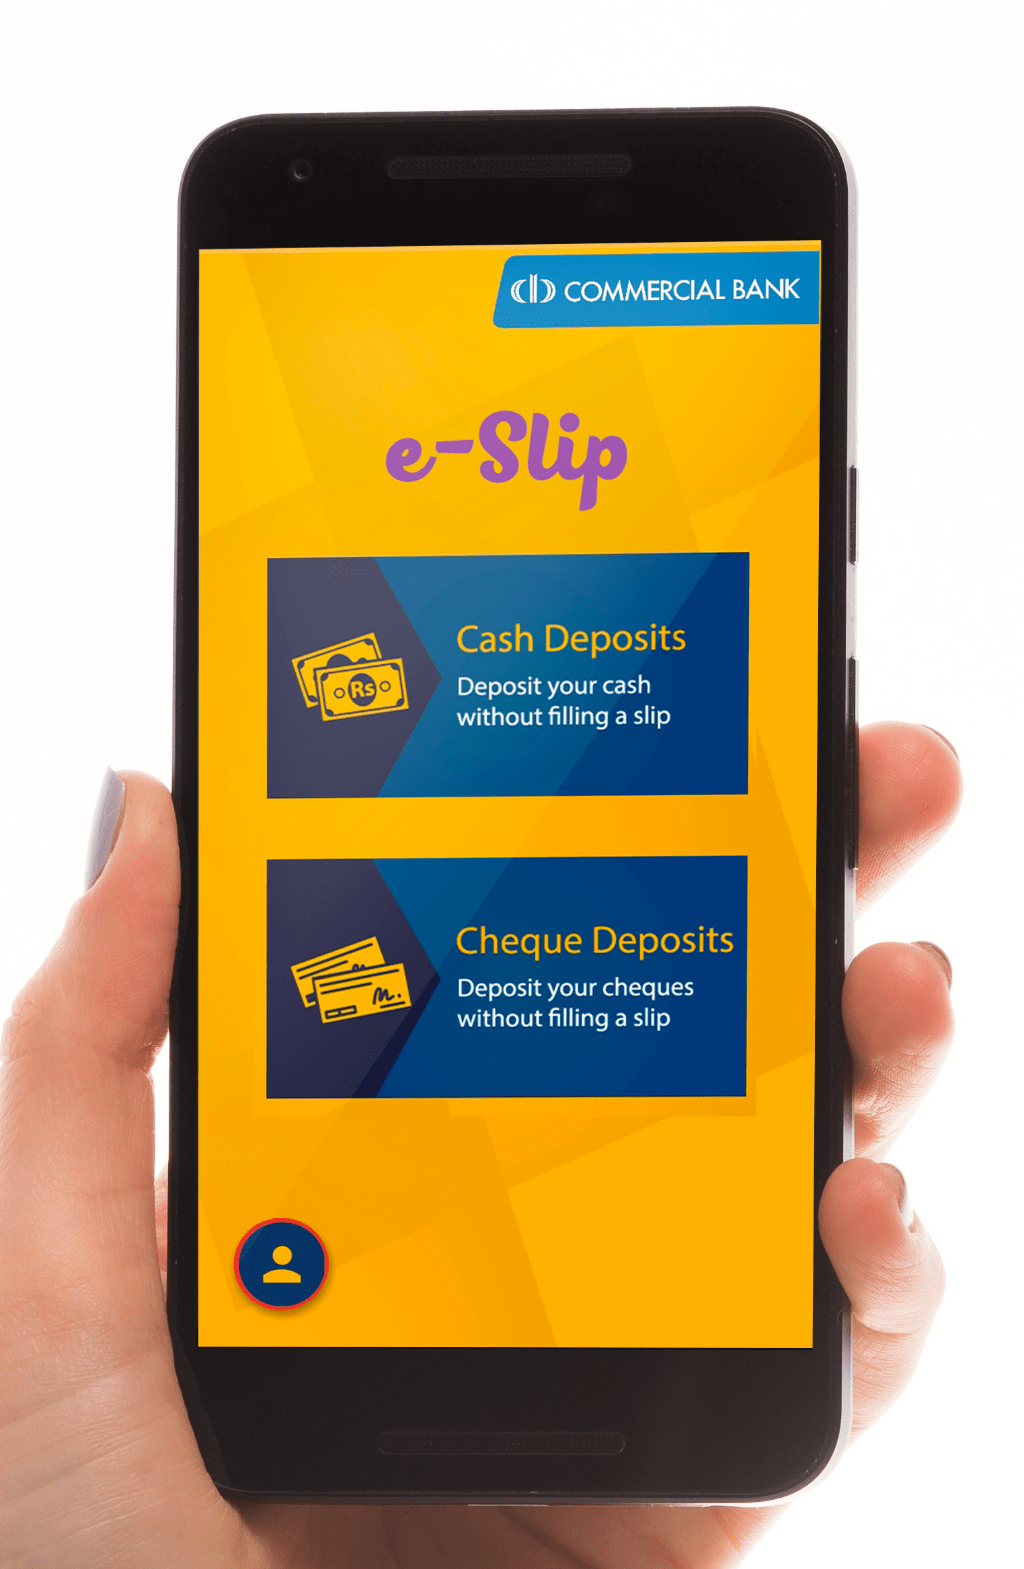 eSlips for cash and cheque deposits